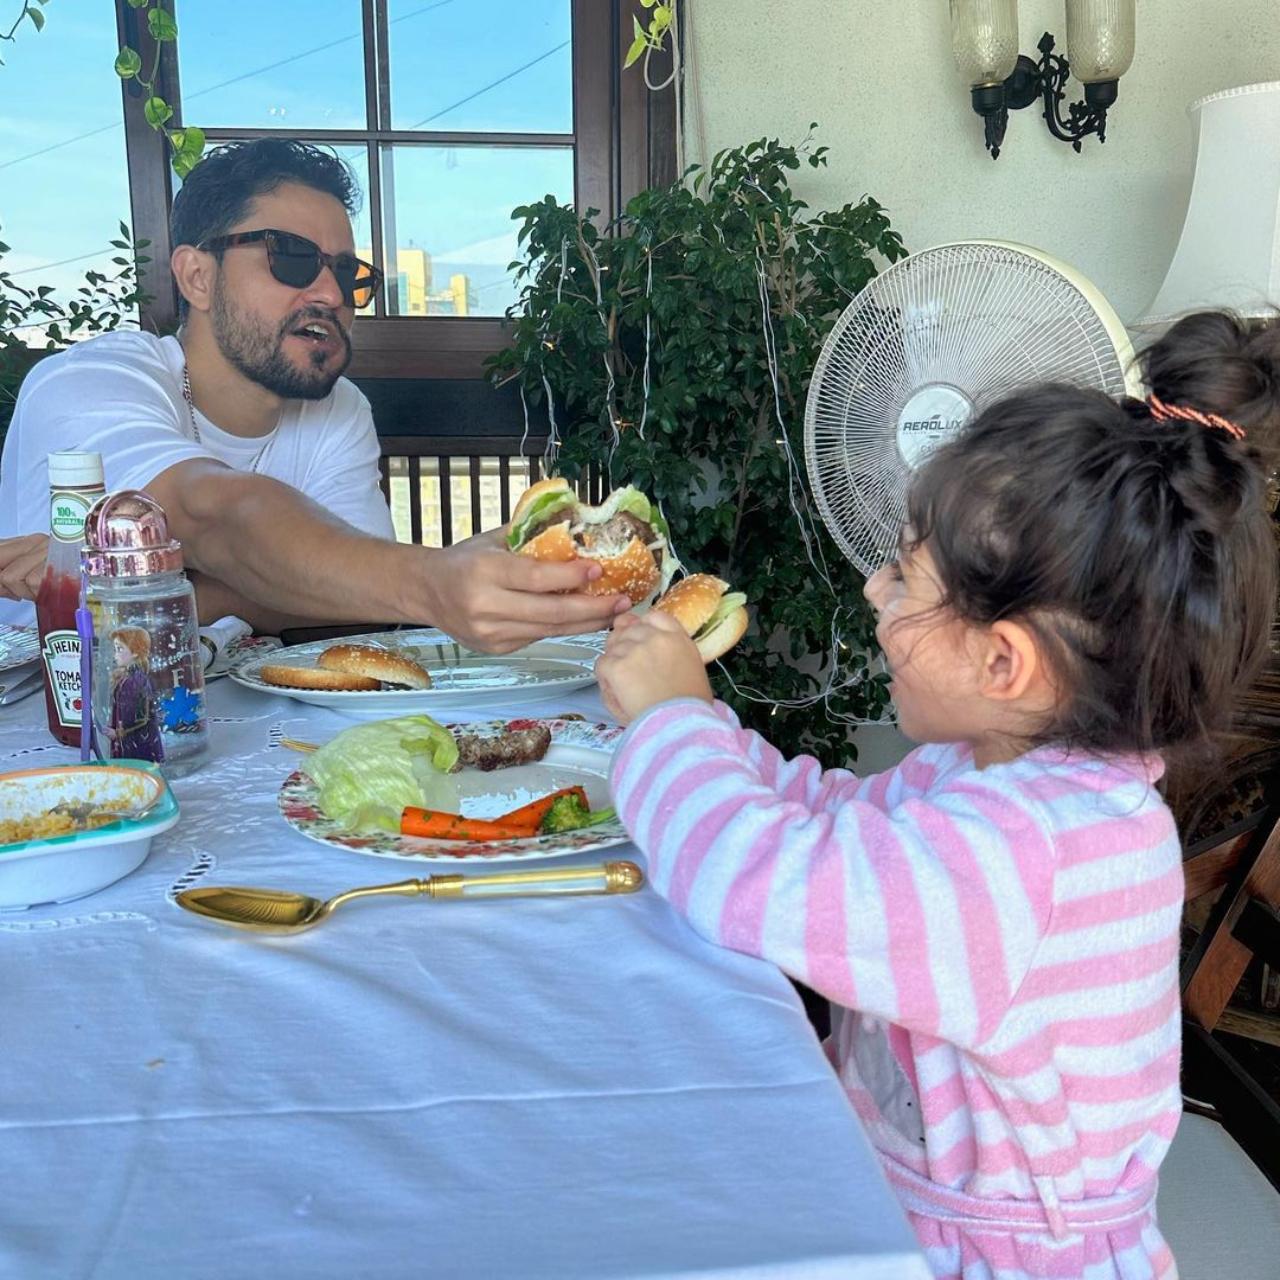 In one of the pictures shared by Soha, Kunal can be seen helping his daughter Inaaya with a bite of burger